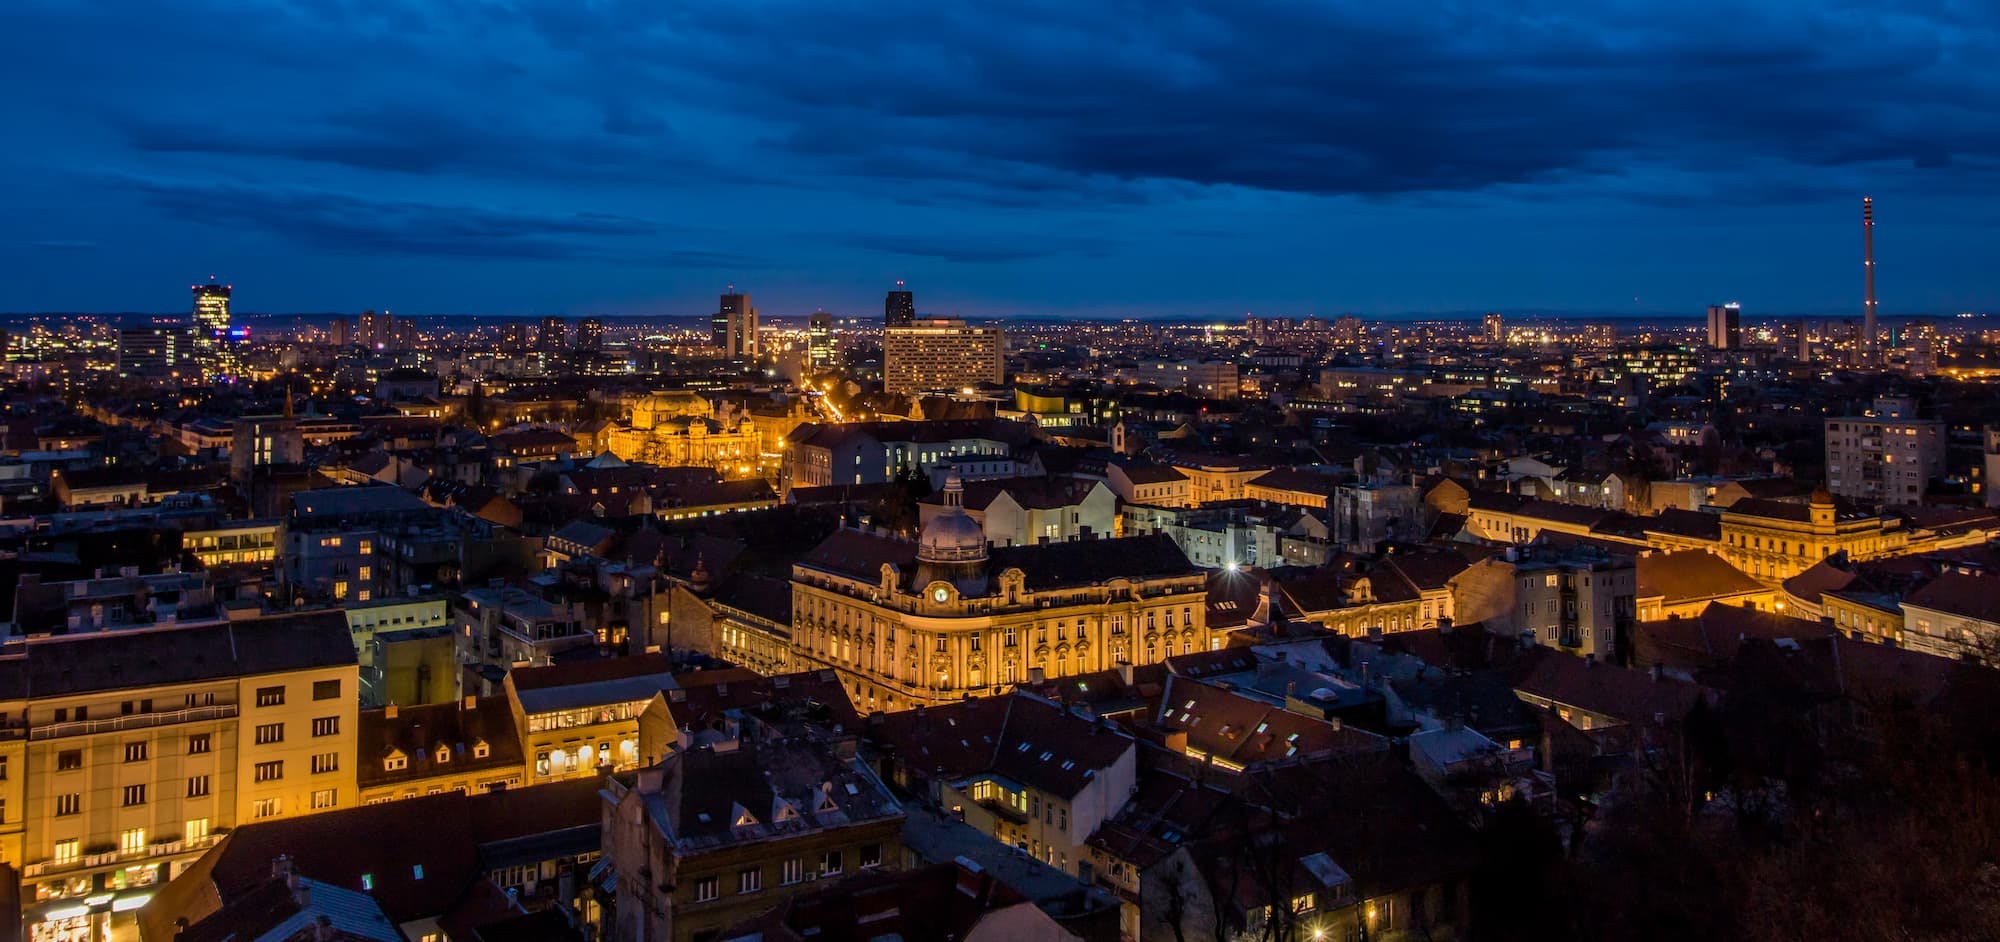 Nighttime panorama of Zagreb, Croatia, with city lights reflecting the potential for VPS hosting services